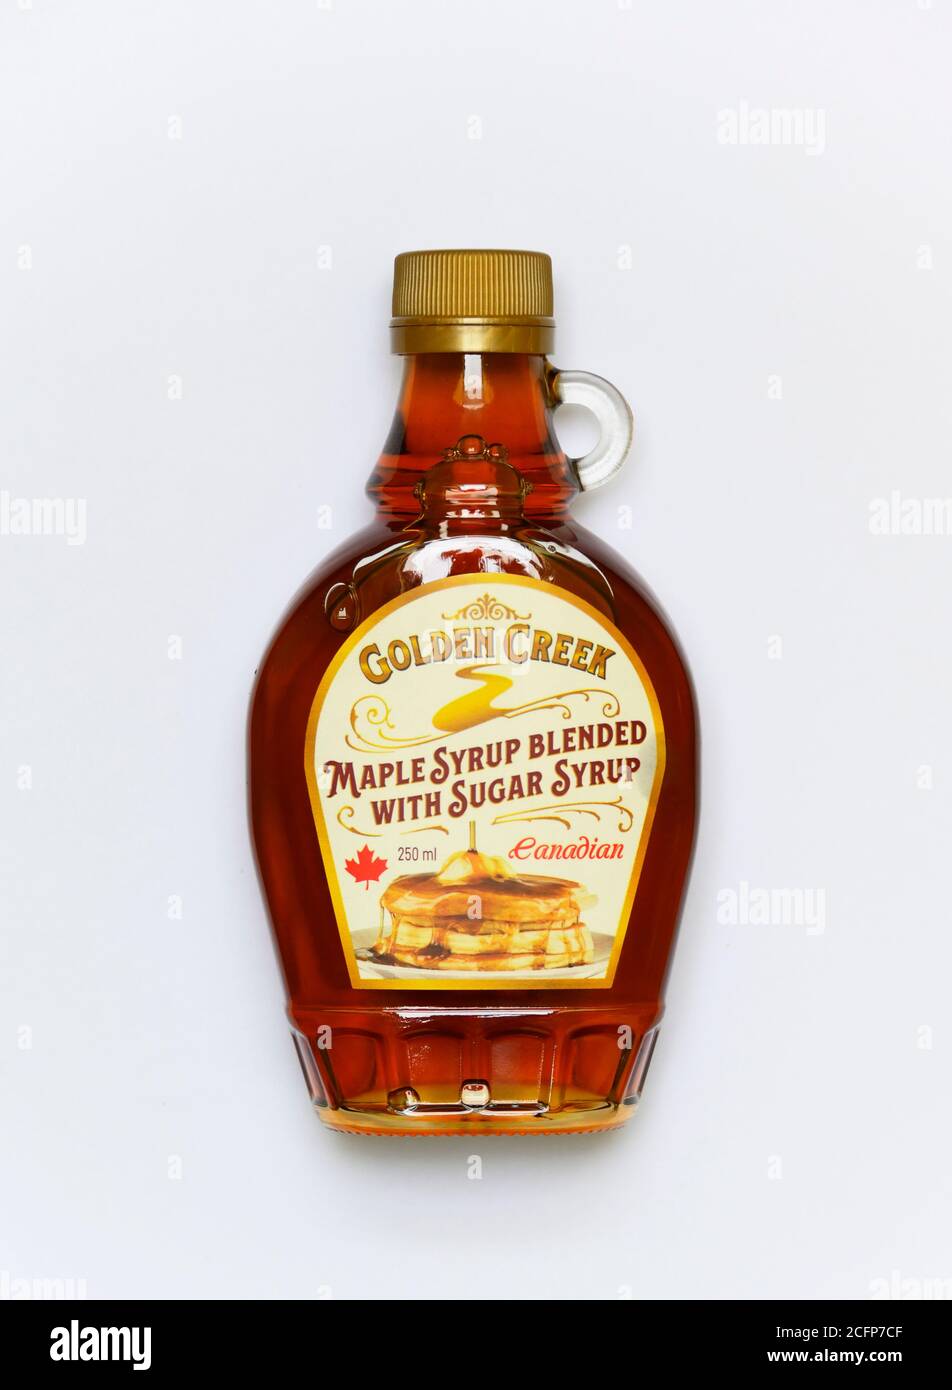 Bottle of 'Golden Creek' Canadian maple syrup blended with sugar syrup. 250ml. Stock Photo